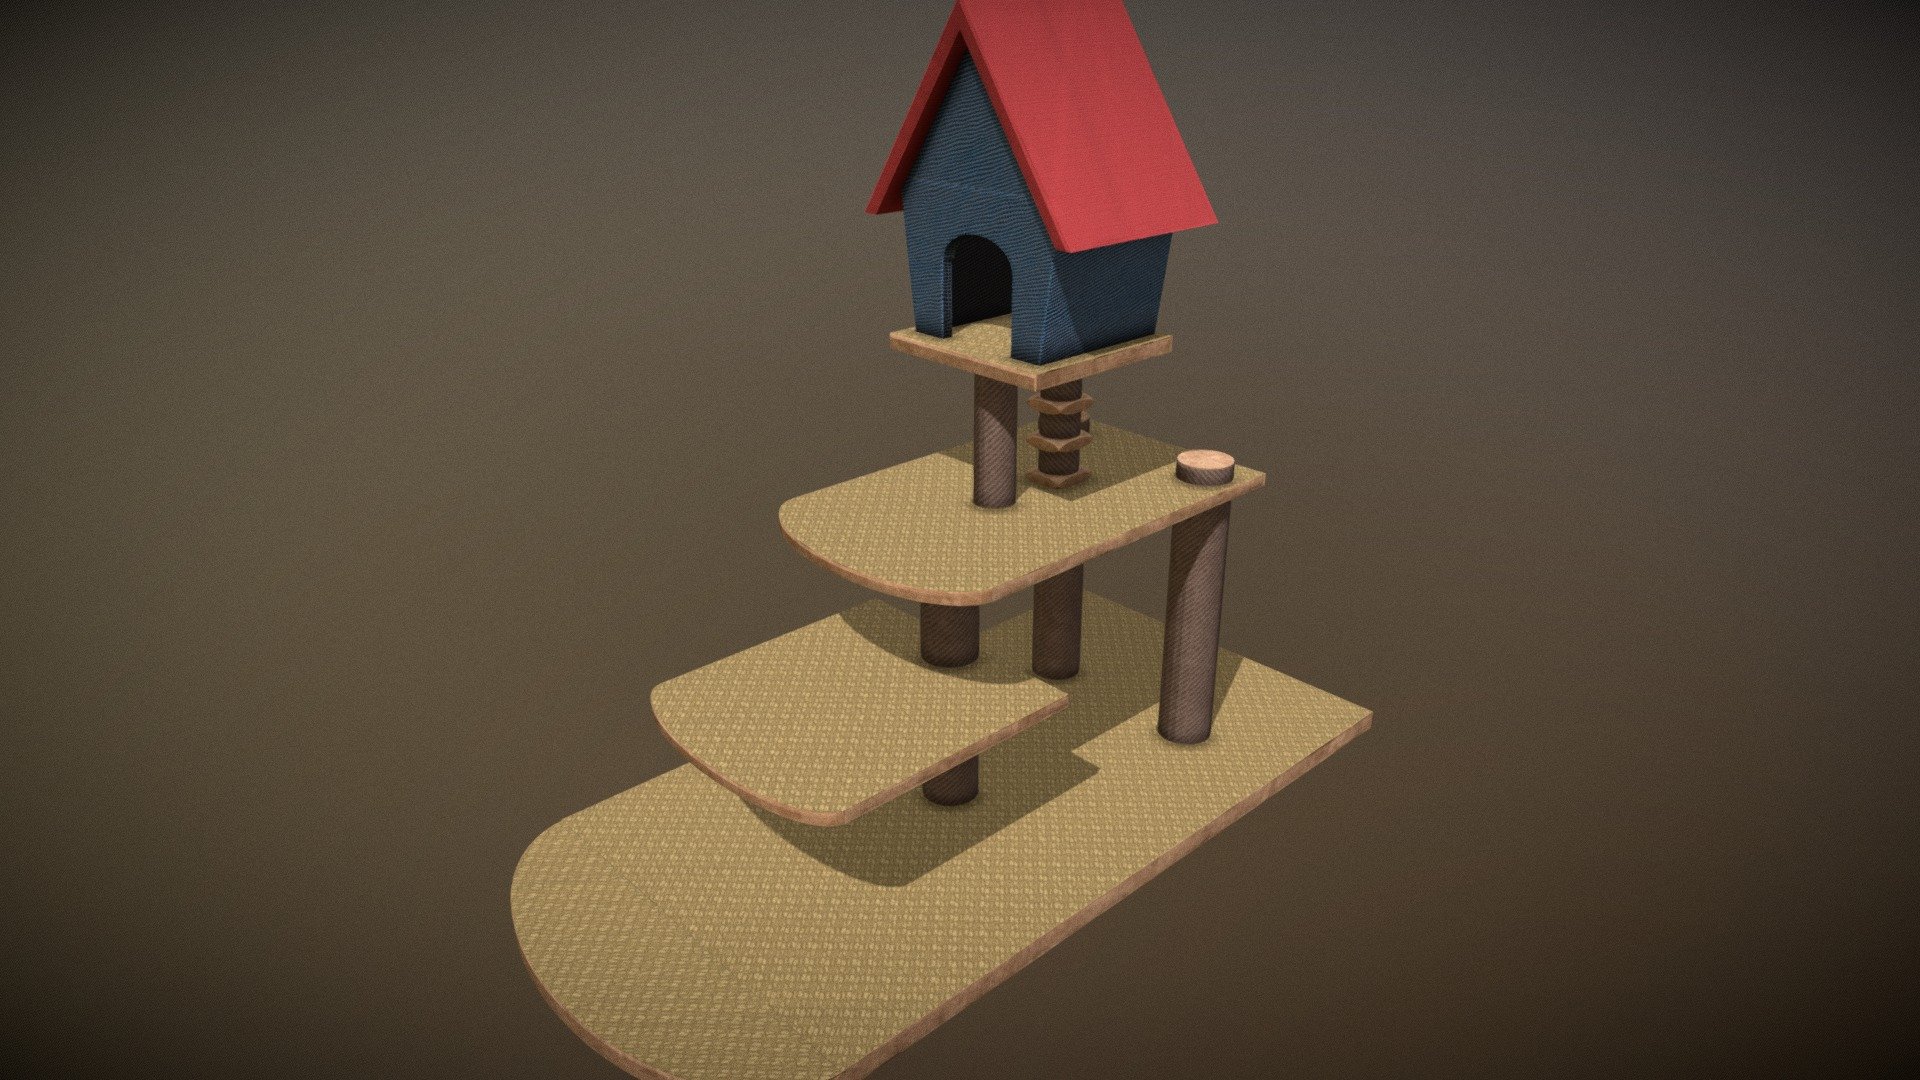 3D low-poly model of Cat House

The cat will still settle in the box.

PBR 2k texture set with AO. Can be used anywhere you want 3d model